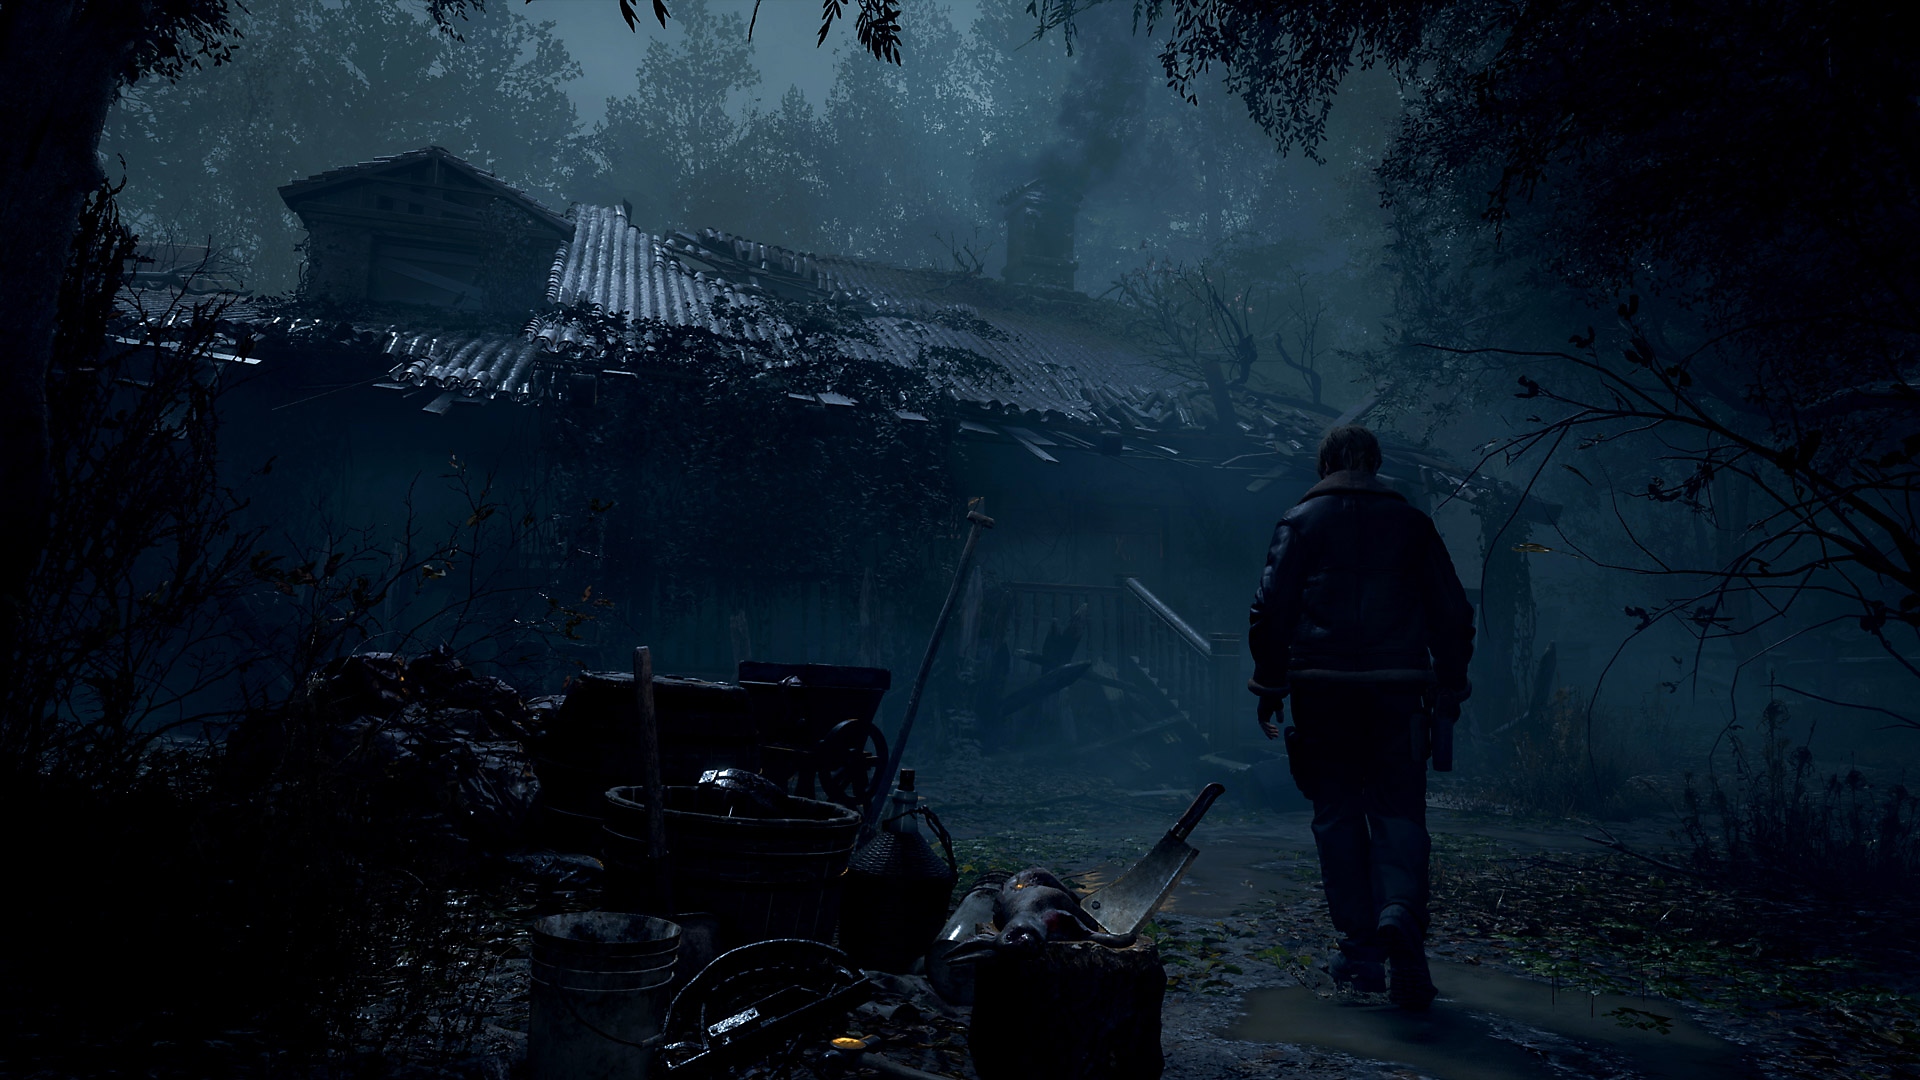 Resident Evil 4 screenshot featuring Leon Kennedy approaching a dilapidated rural dwelling.